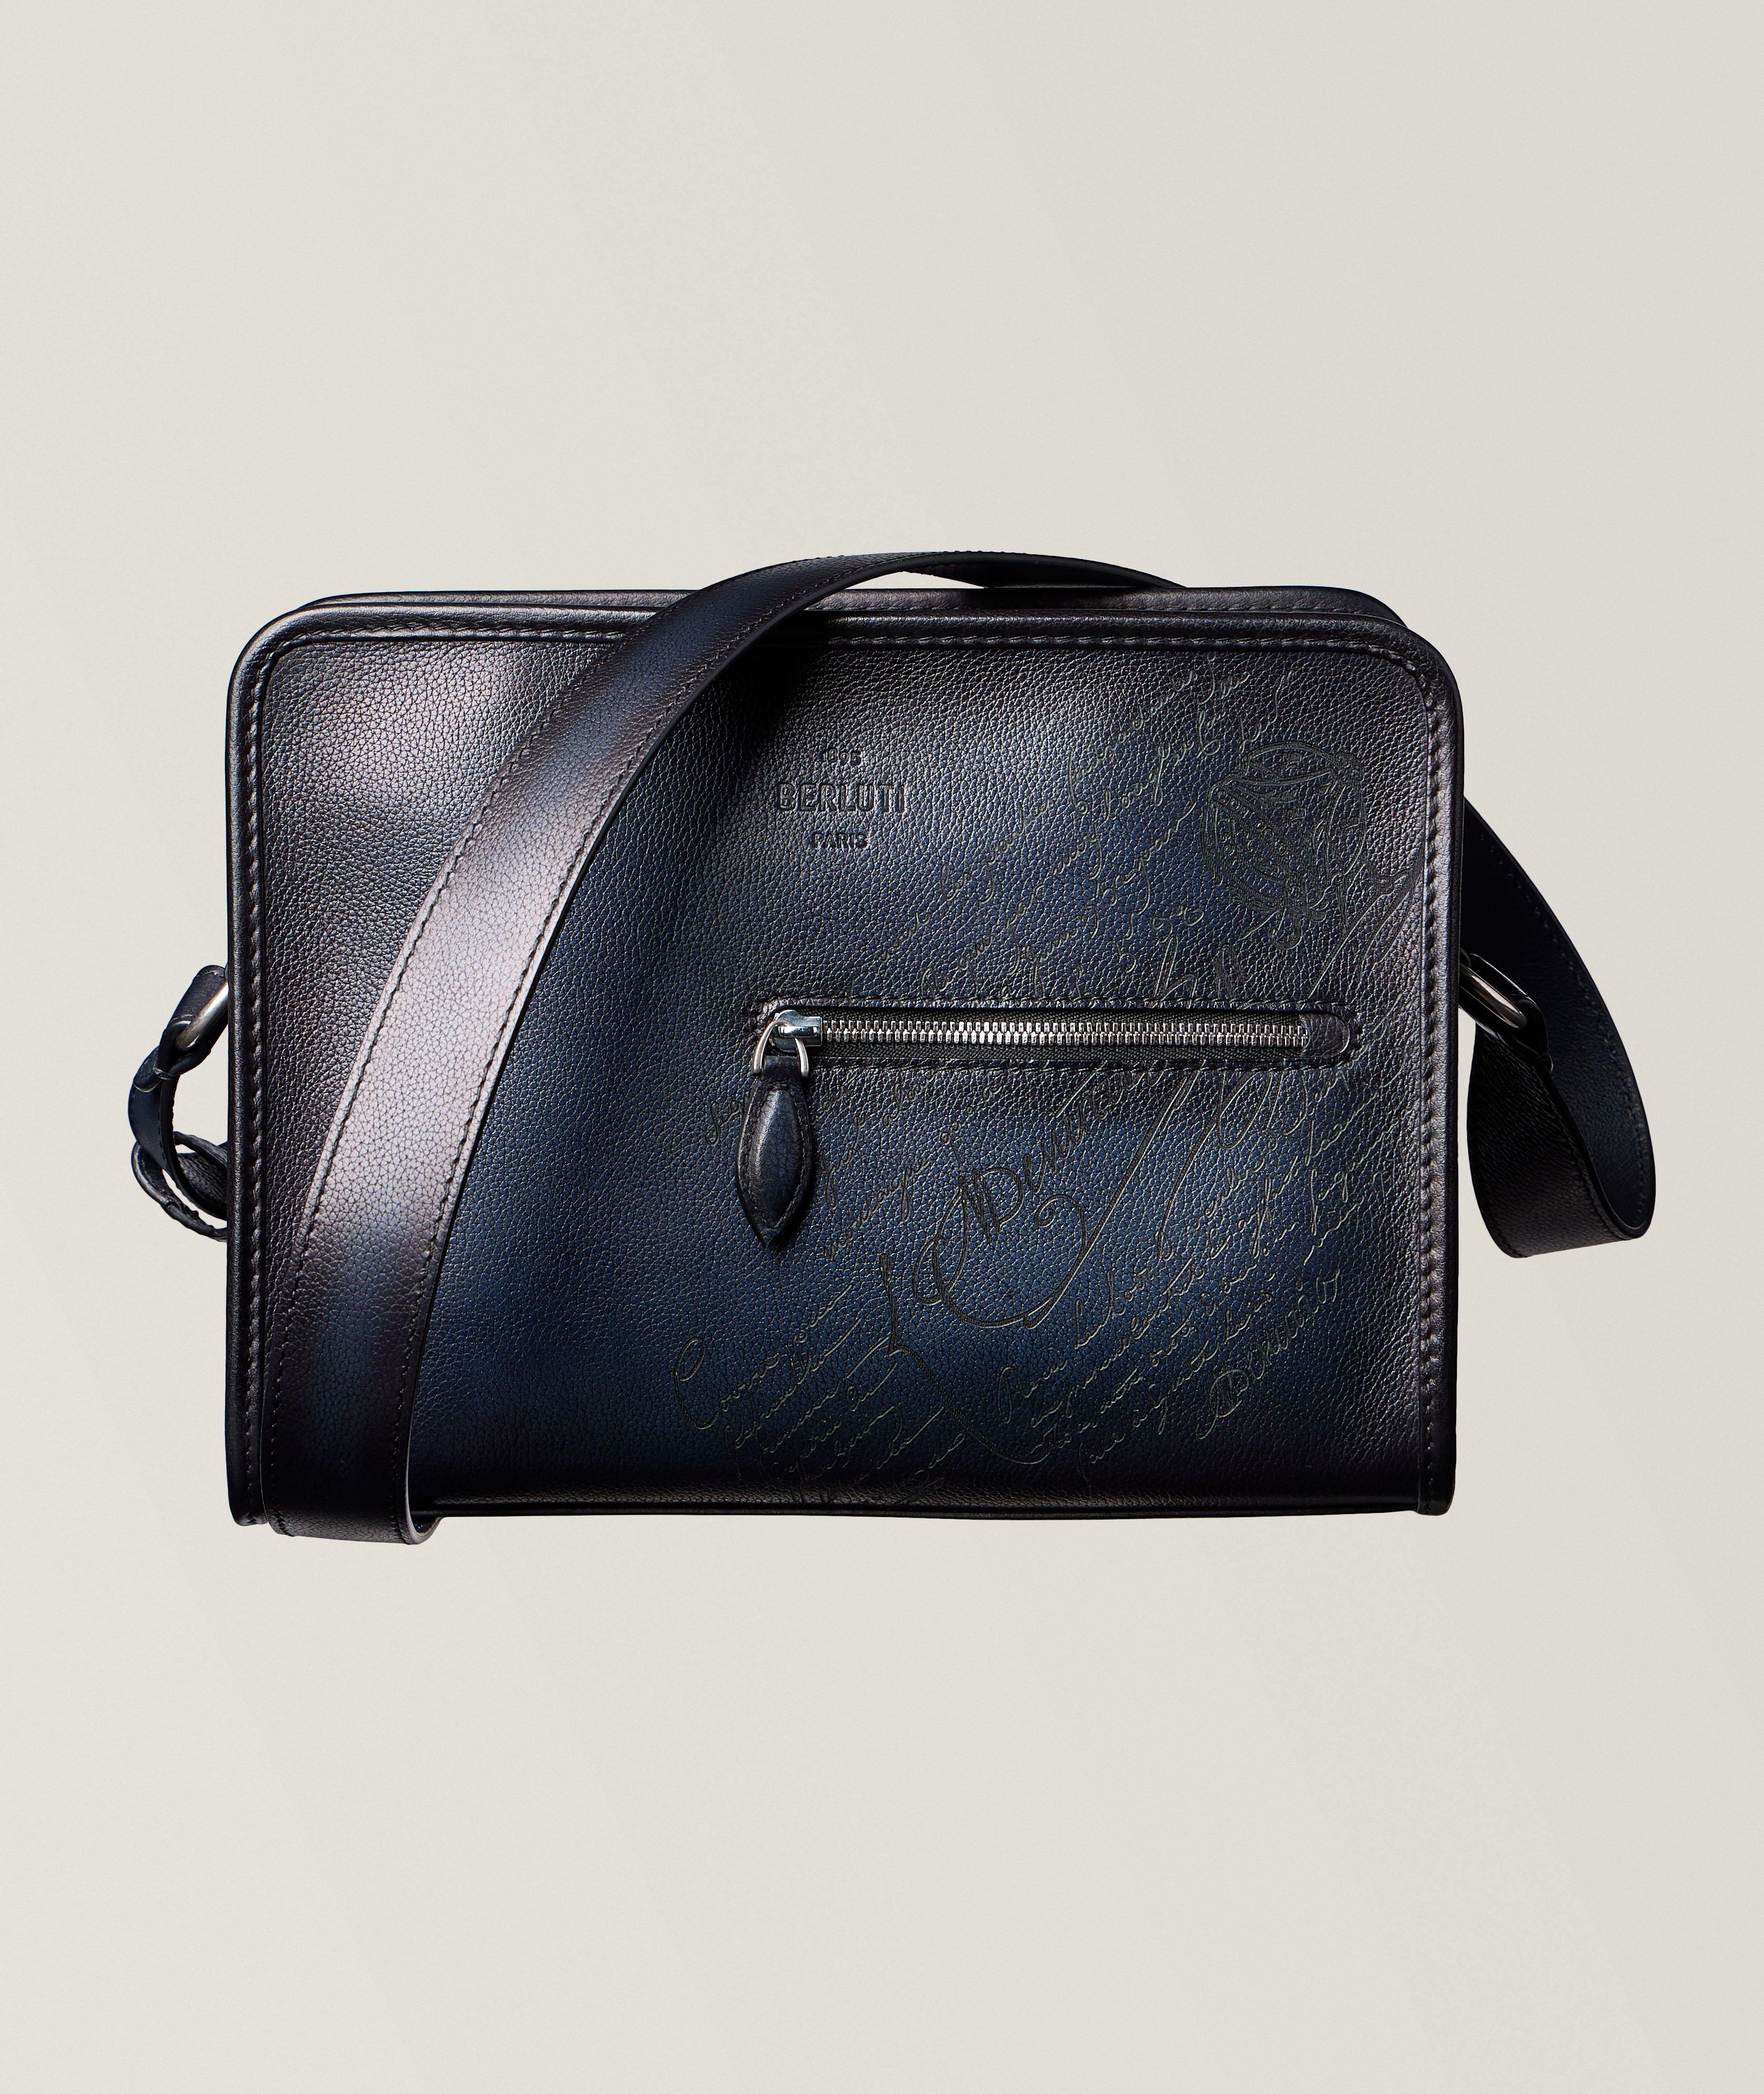 Journalier Scritto Leather Messenger Bag  image 0